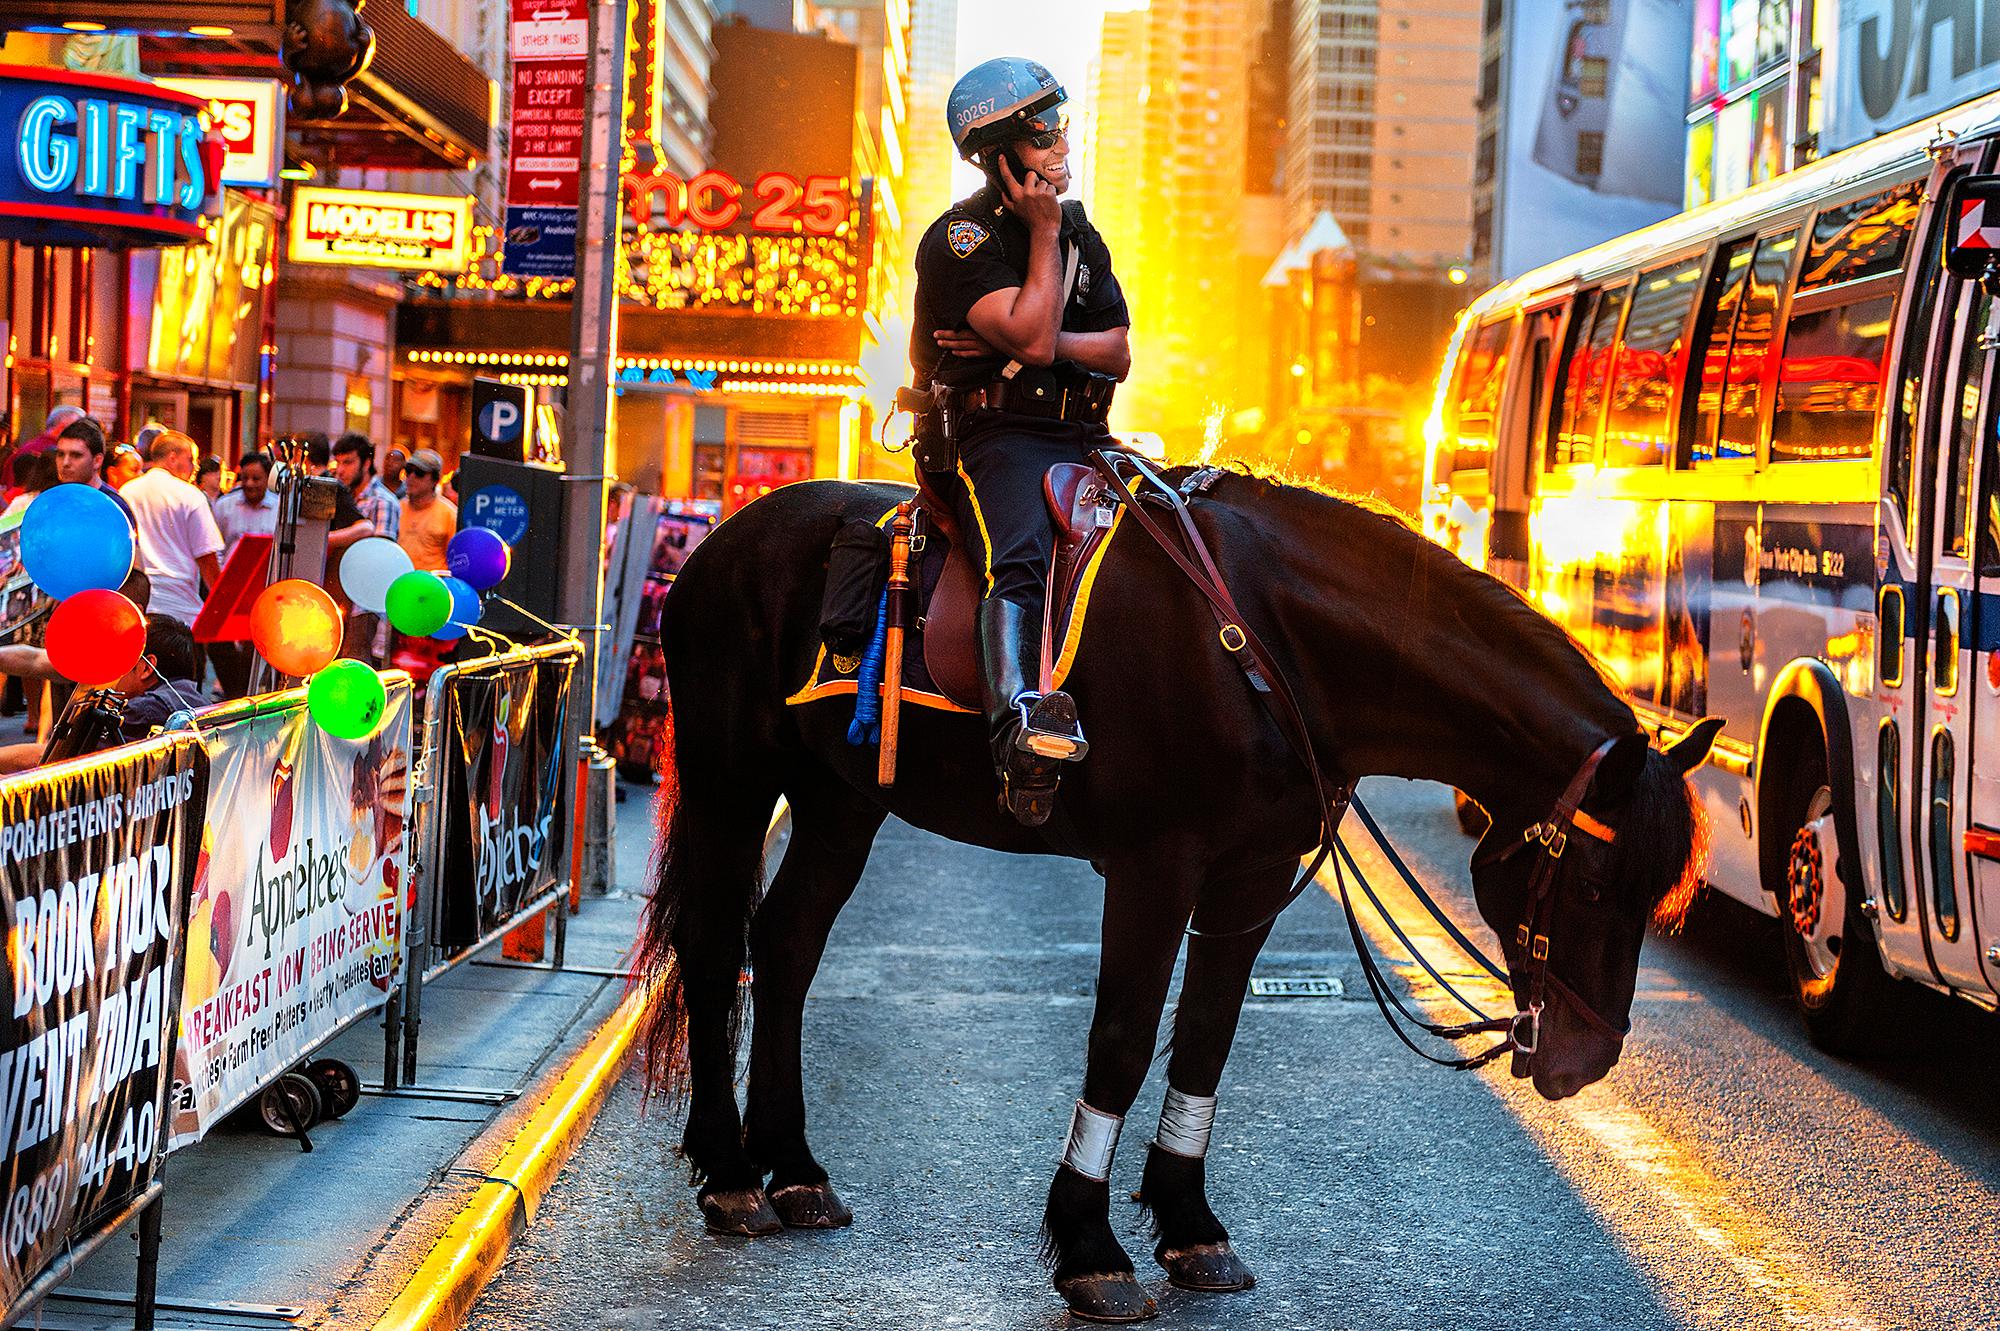 Mitchell Funk Portrait Photograph - Laughing Policeman on Horse 42nd Street Times Square Golden Light